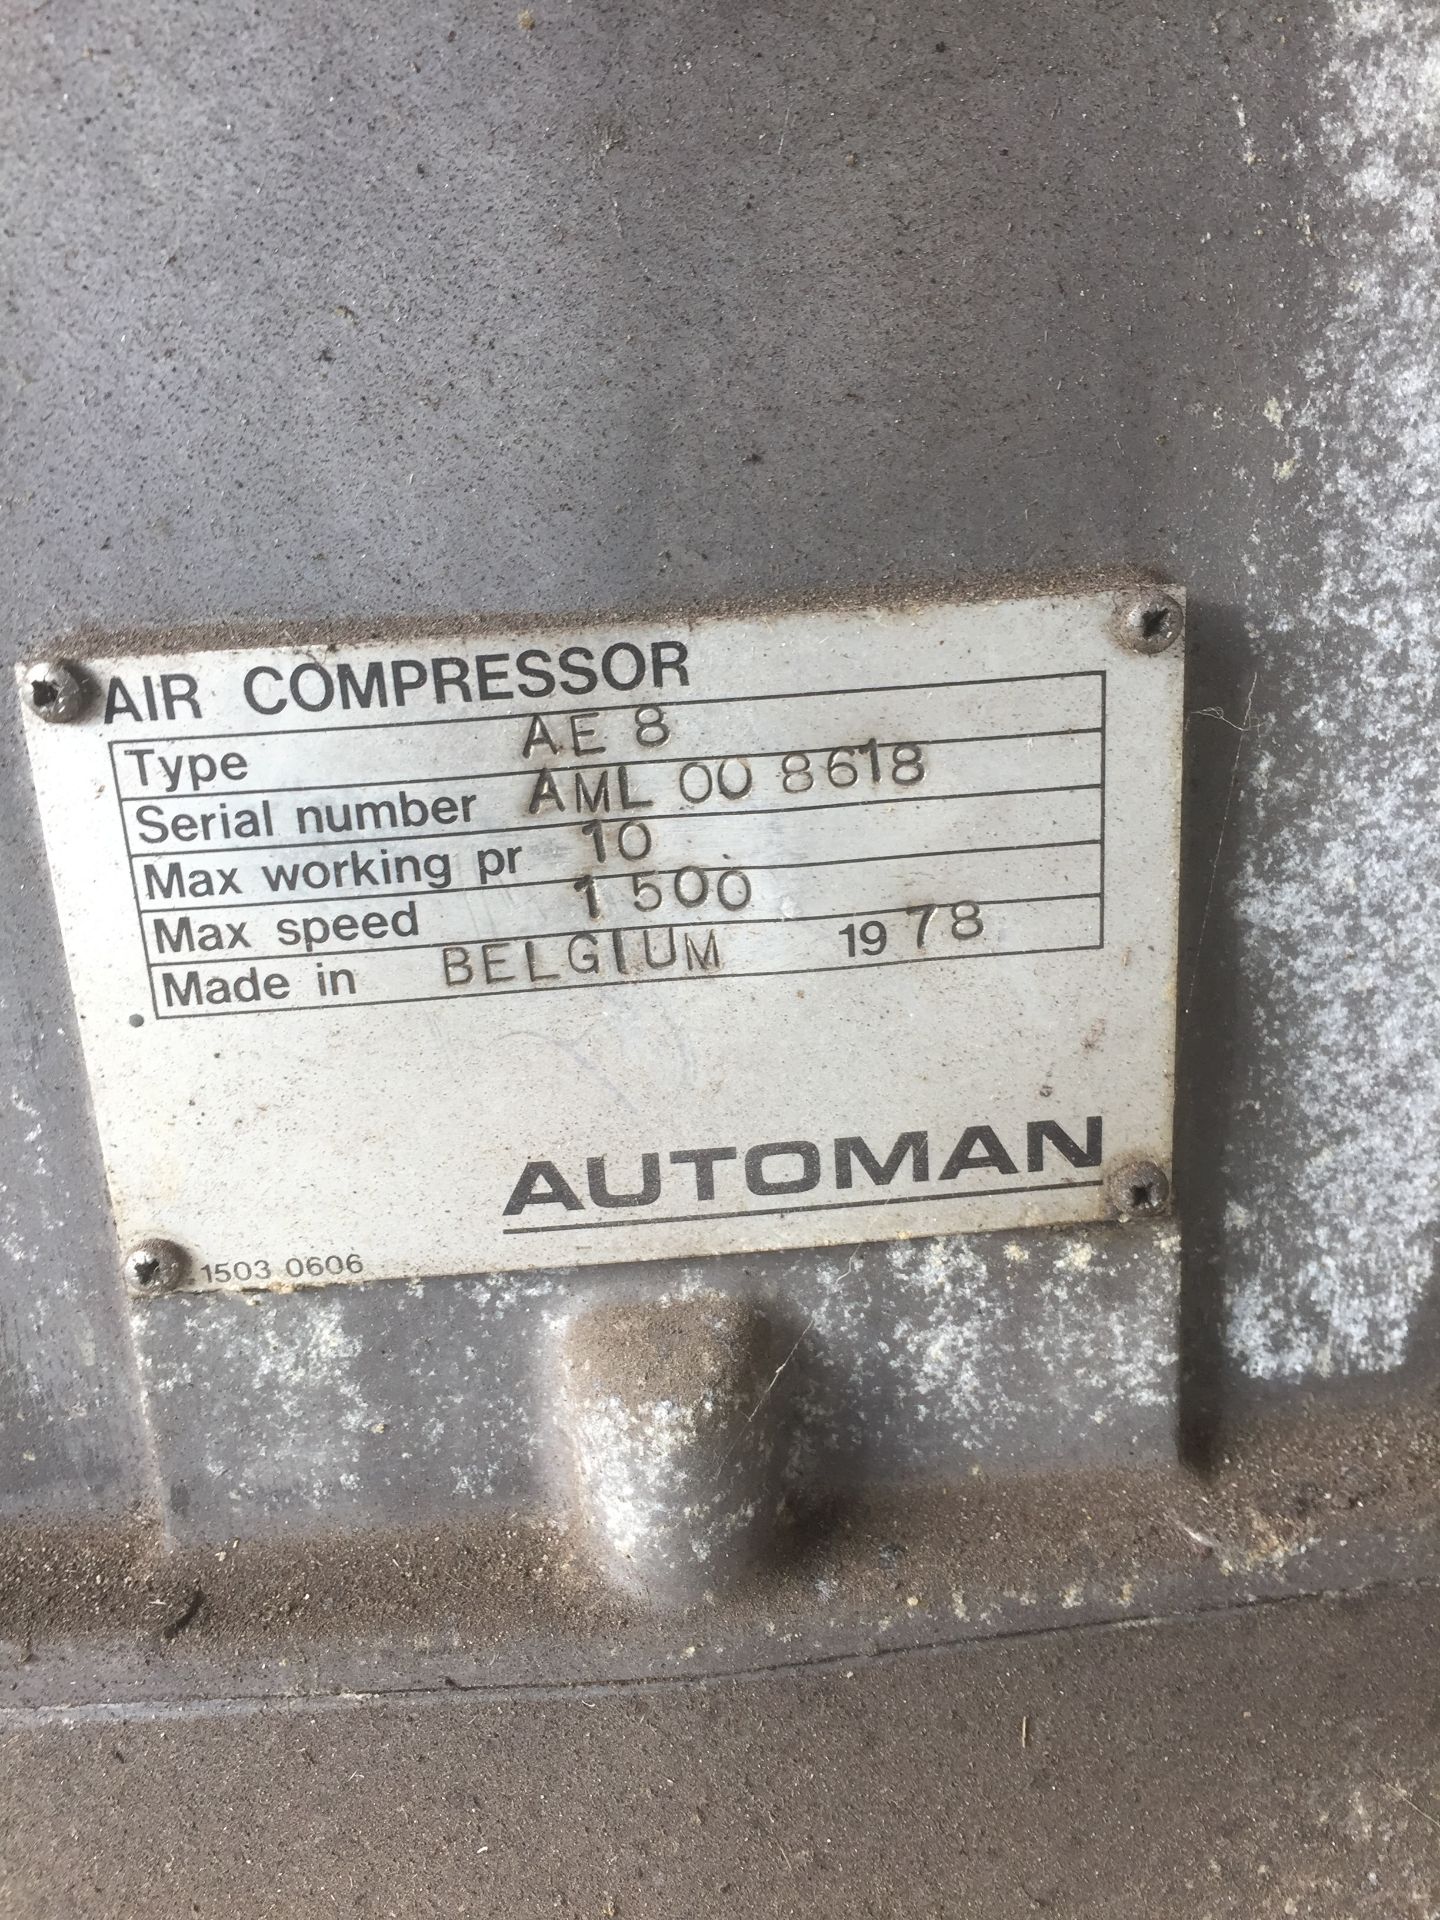 Automan AE8 twin cylinder receiver mounted air compressor, Serial No. AML008618 (1978), 10 BAR - Image 2 of 2